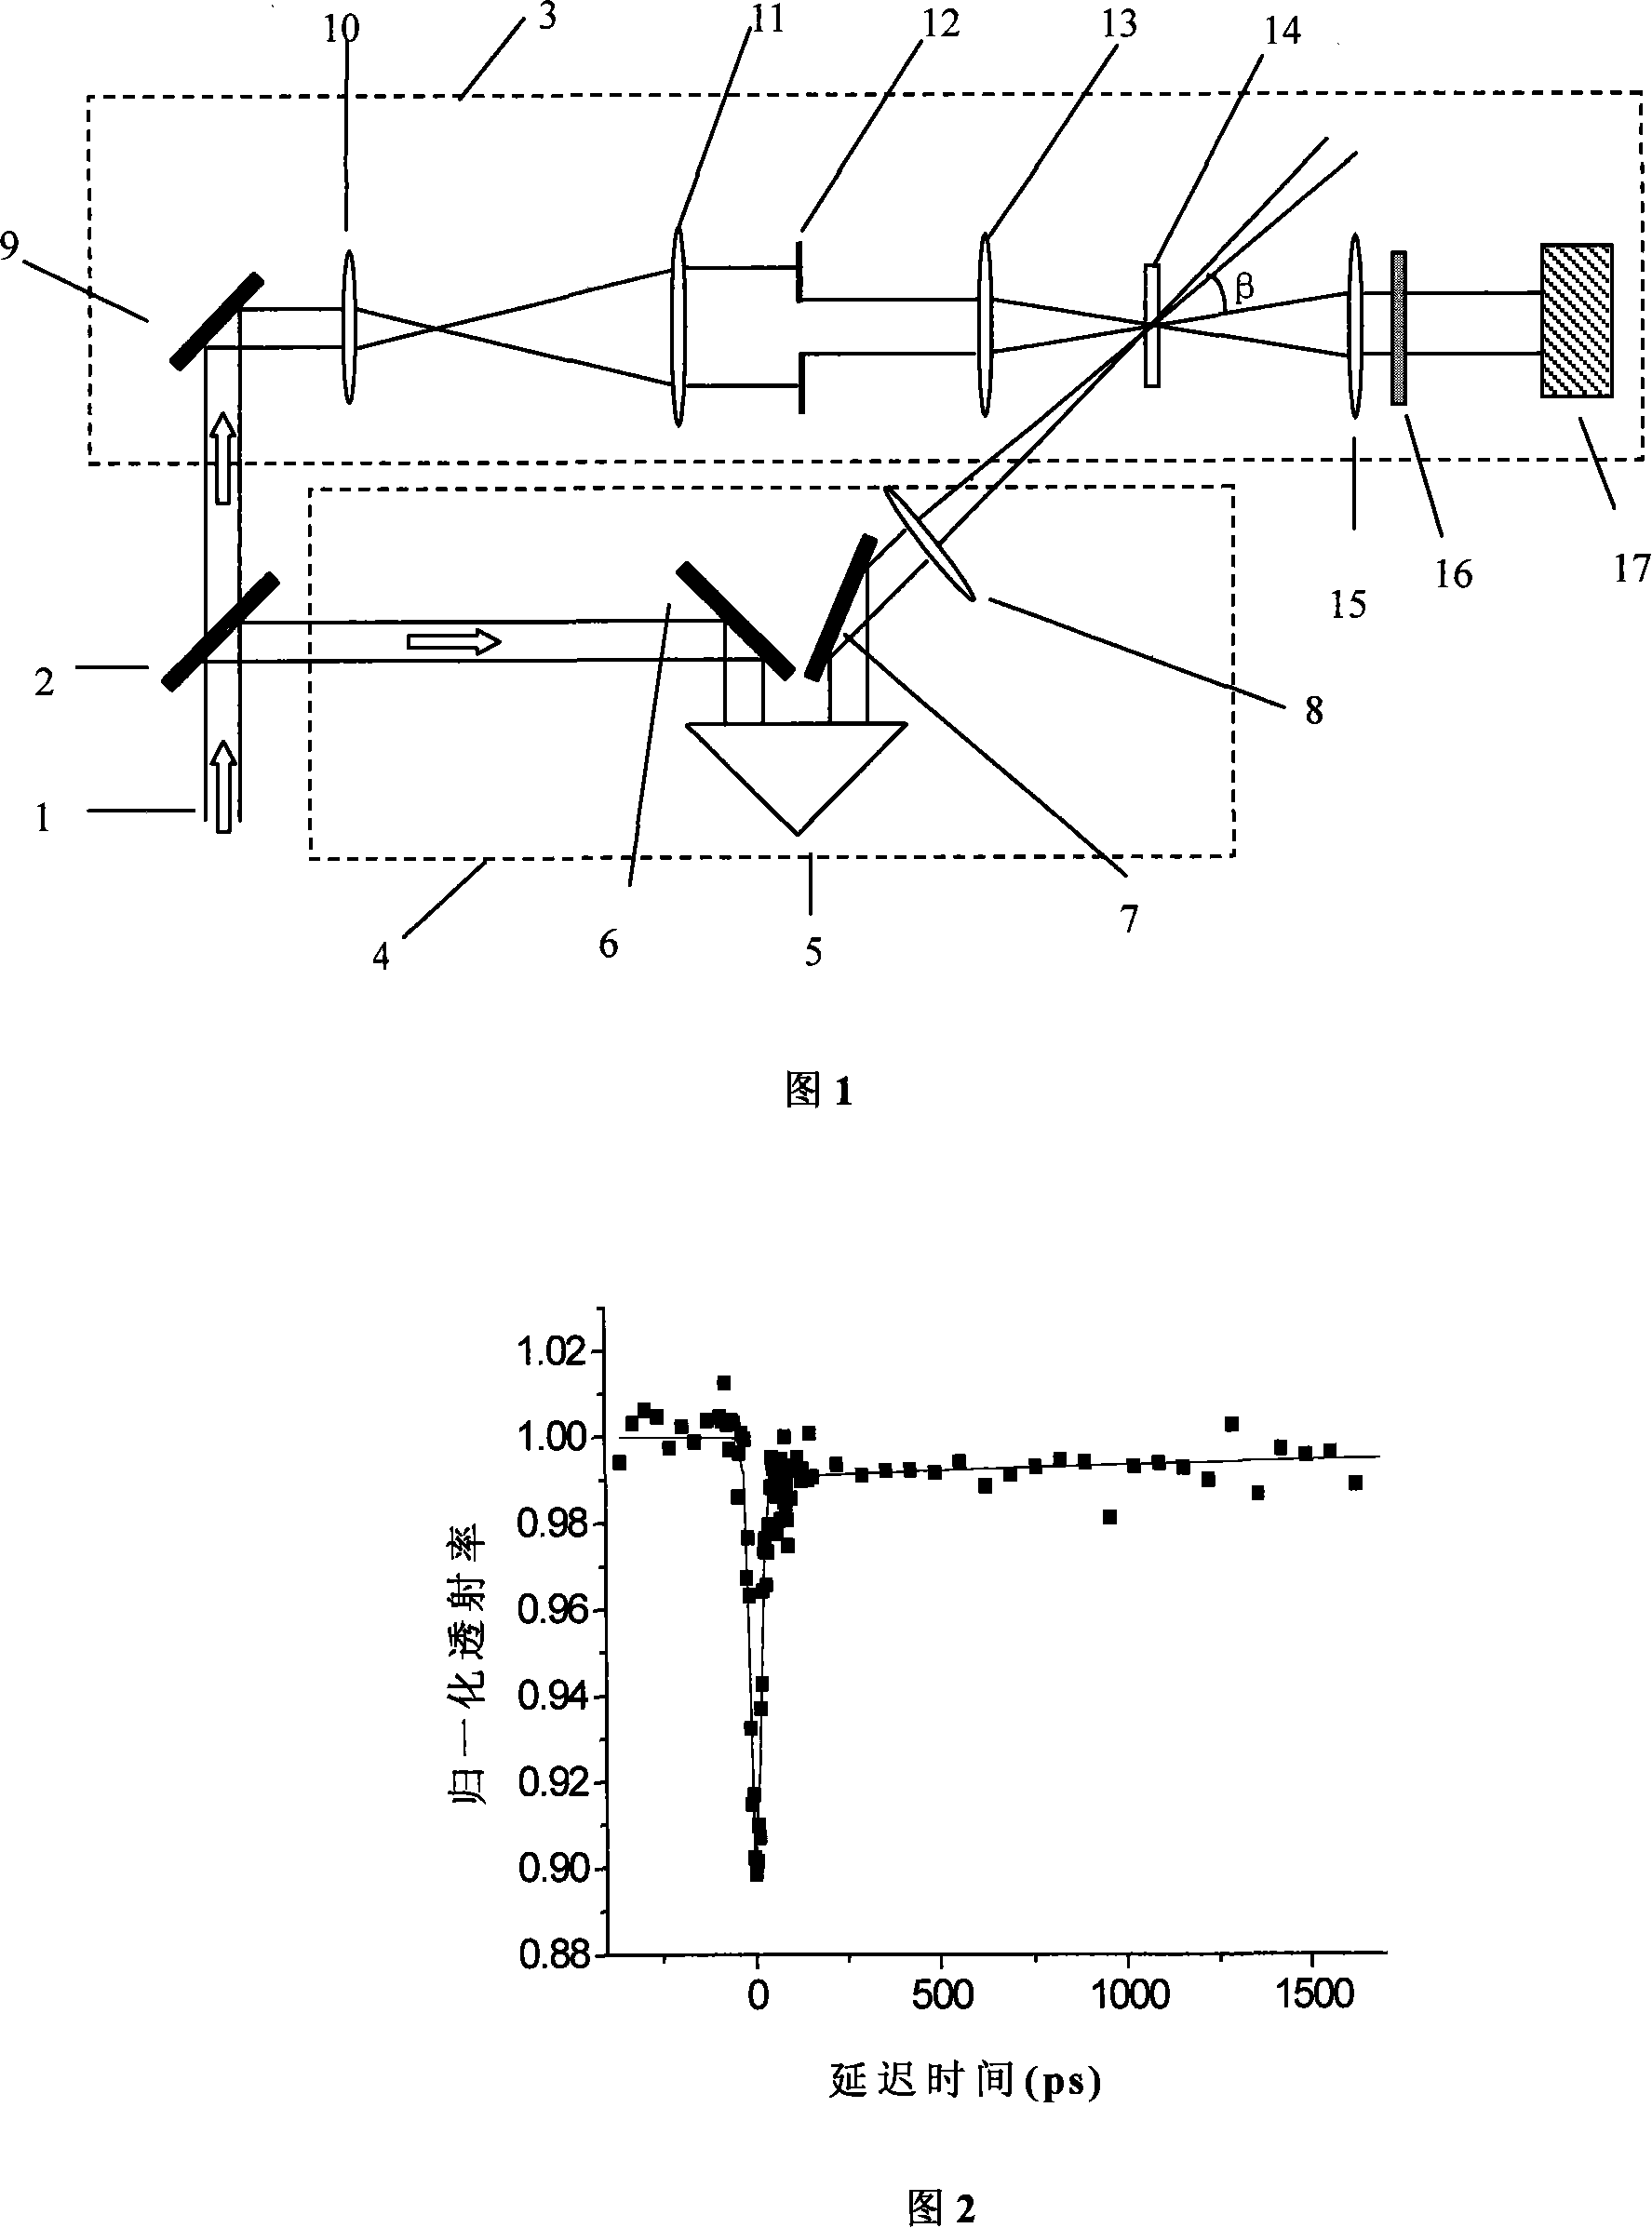 Pumping detecting method based on 4f phase coherent imaging